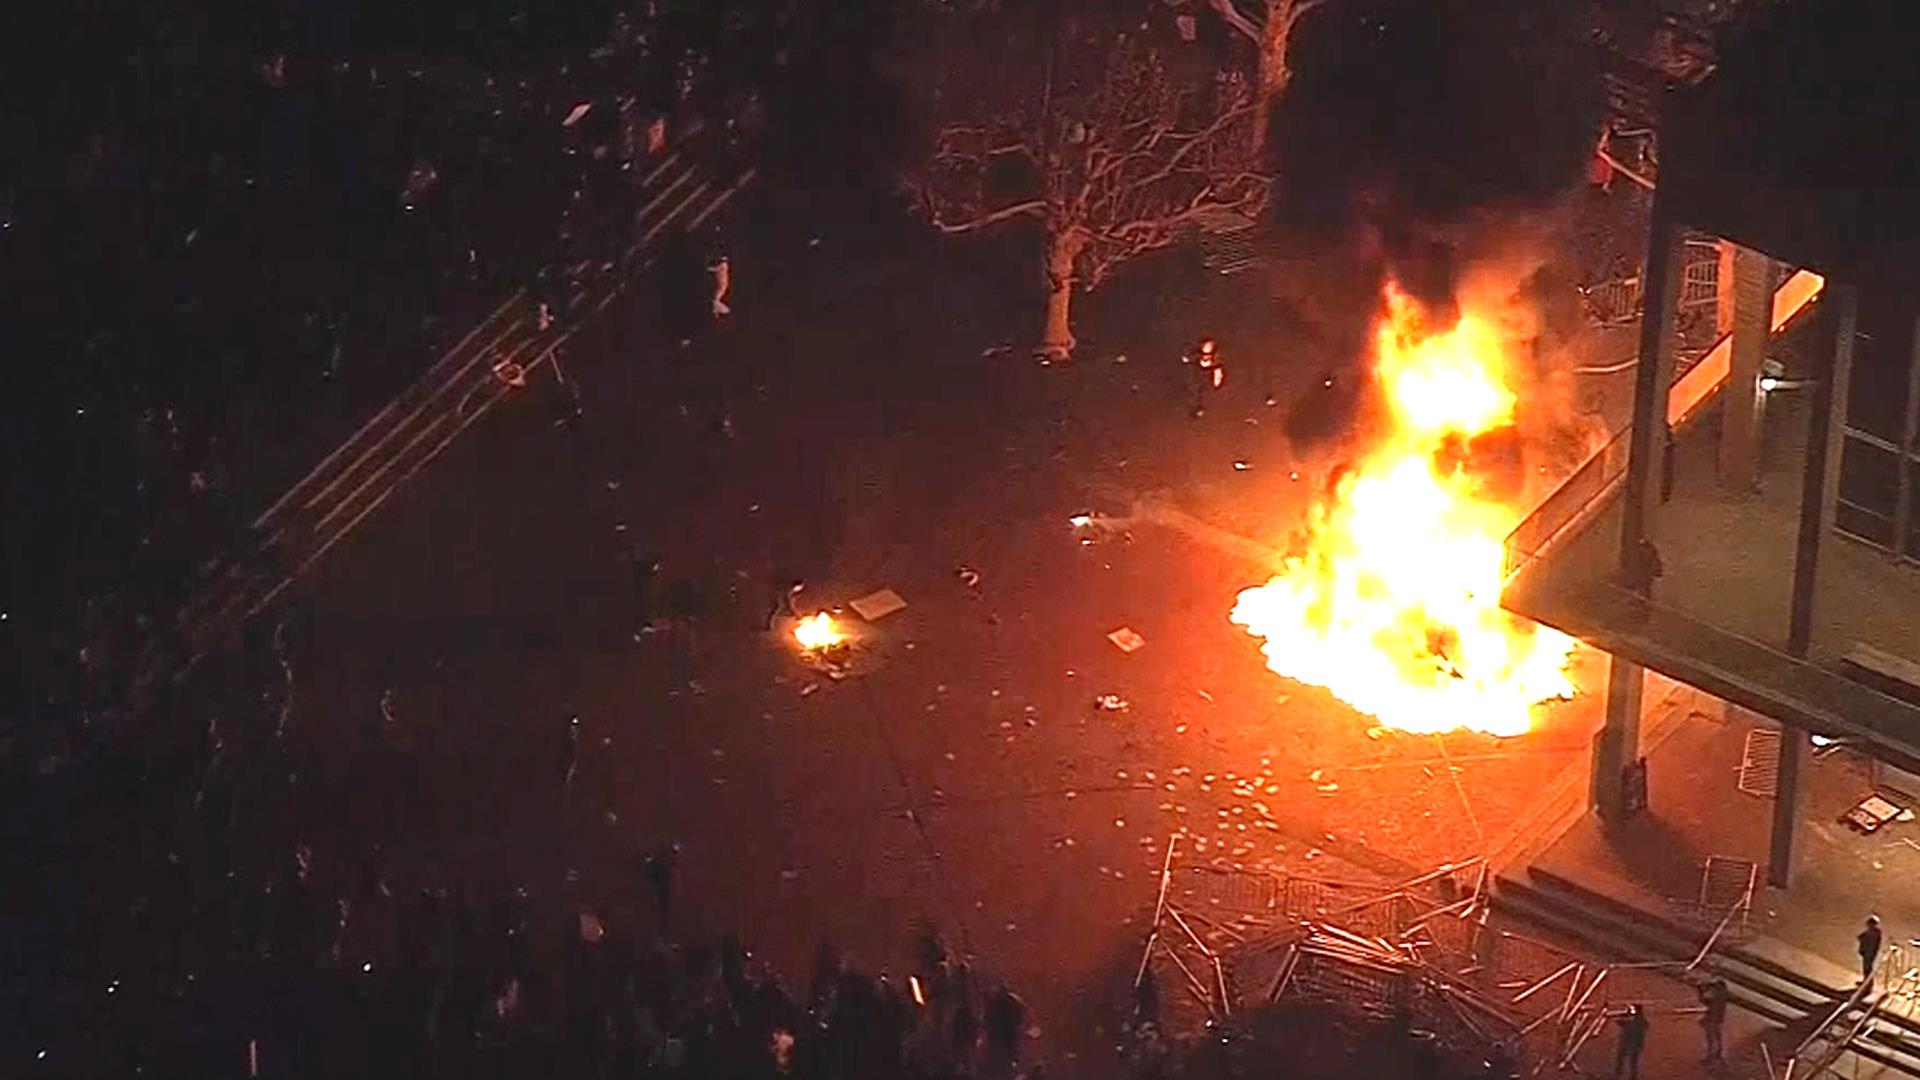 Violent protests at UC Berkeley prevent Milo Yiannopoulos event